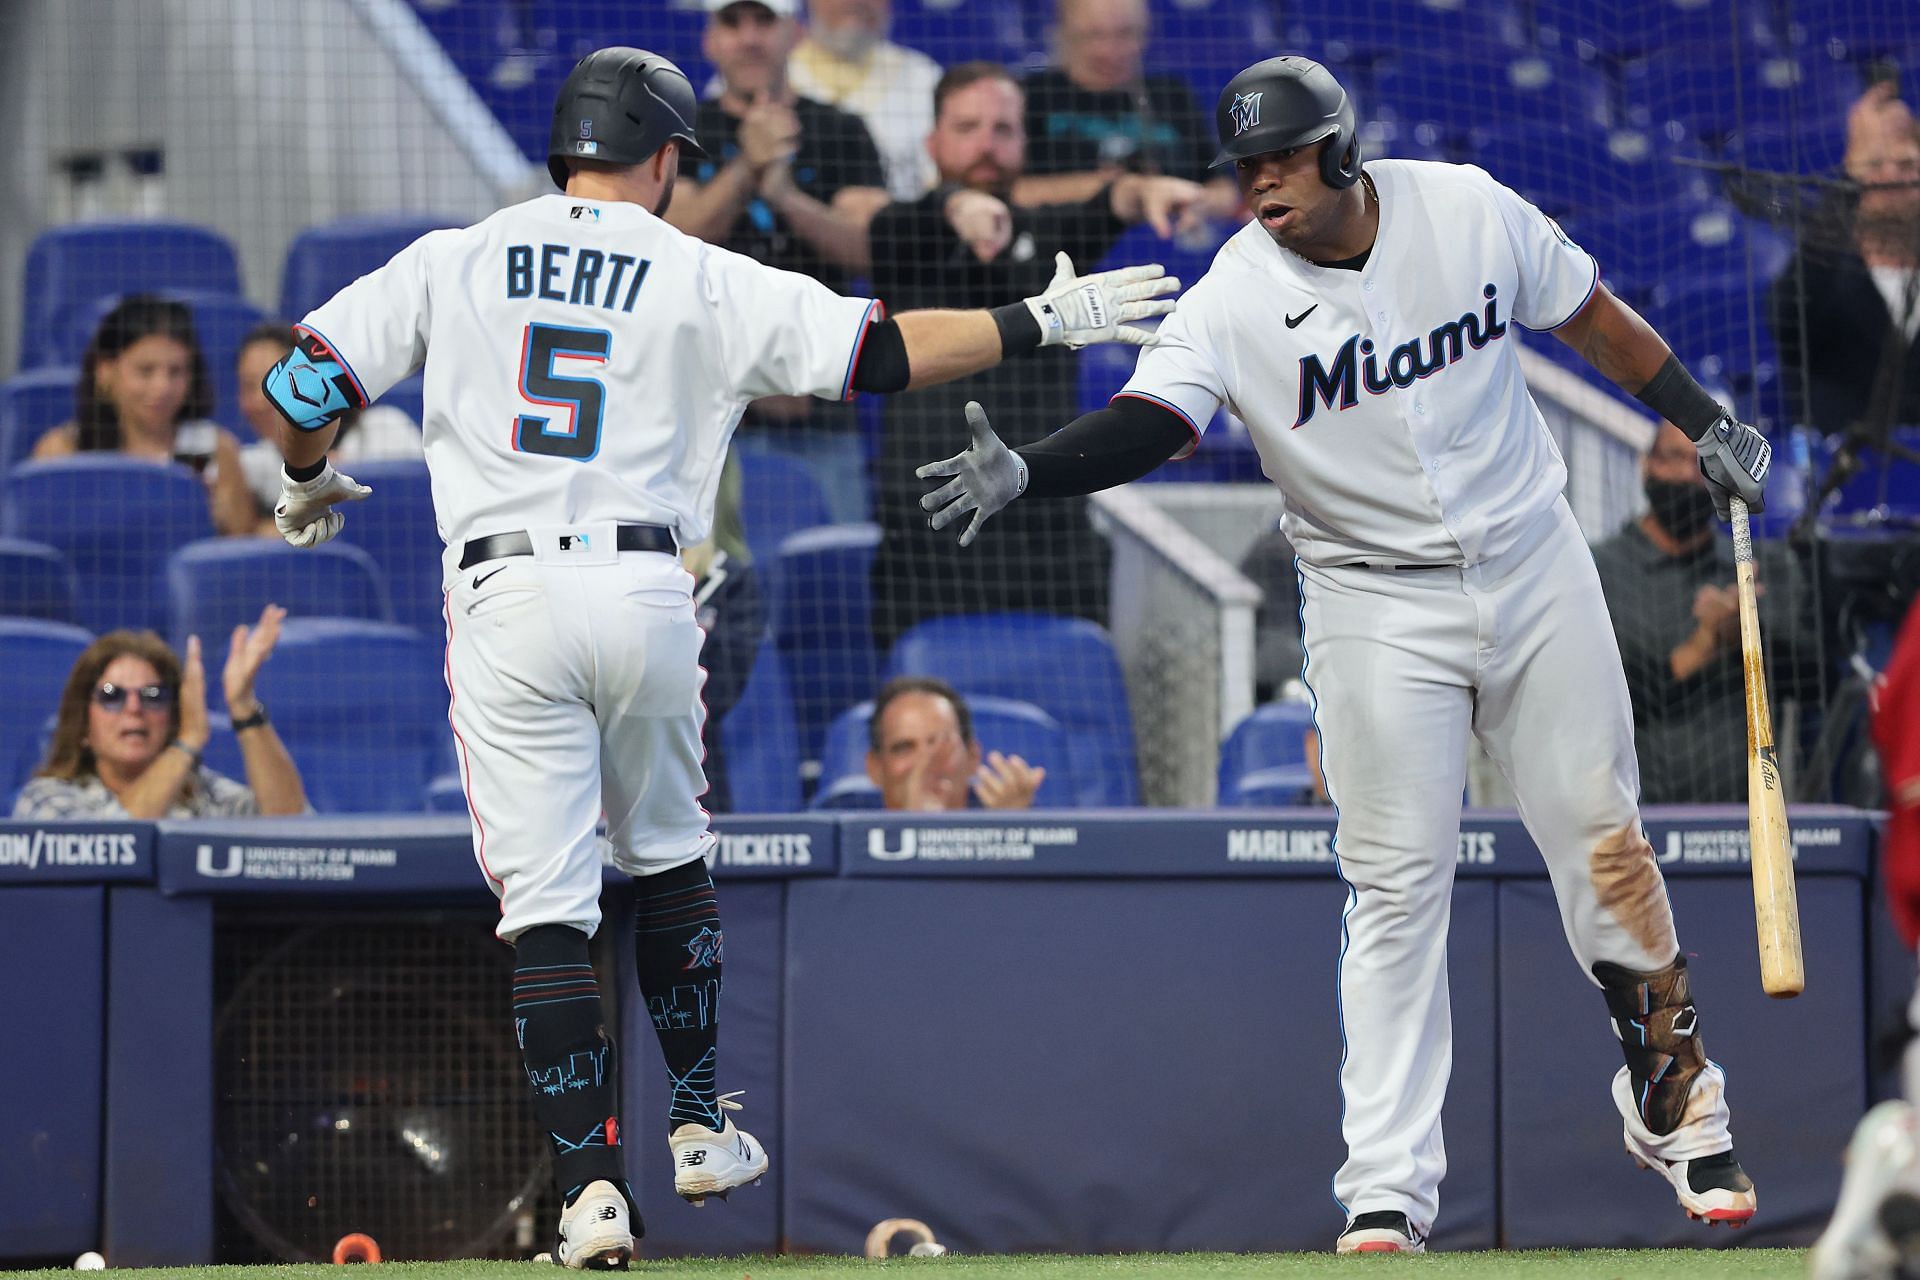 Berti celenrates a home run with his Miami Marlins teammate.